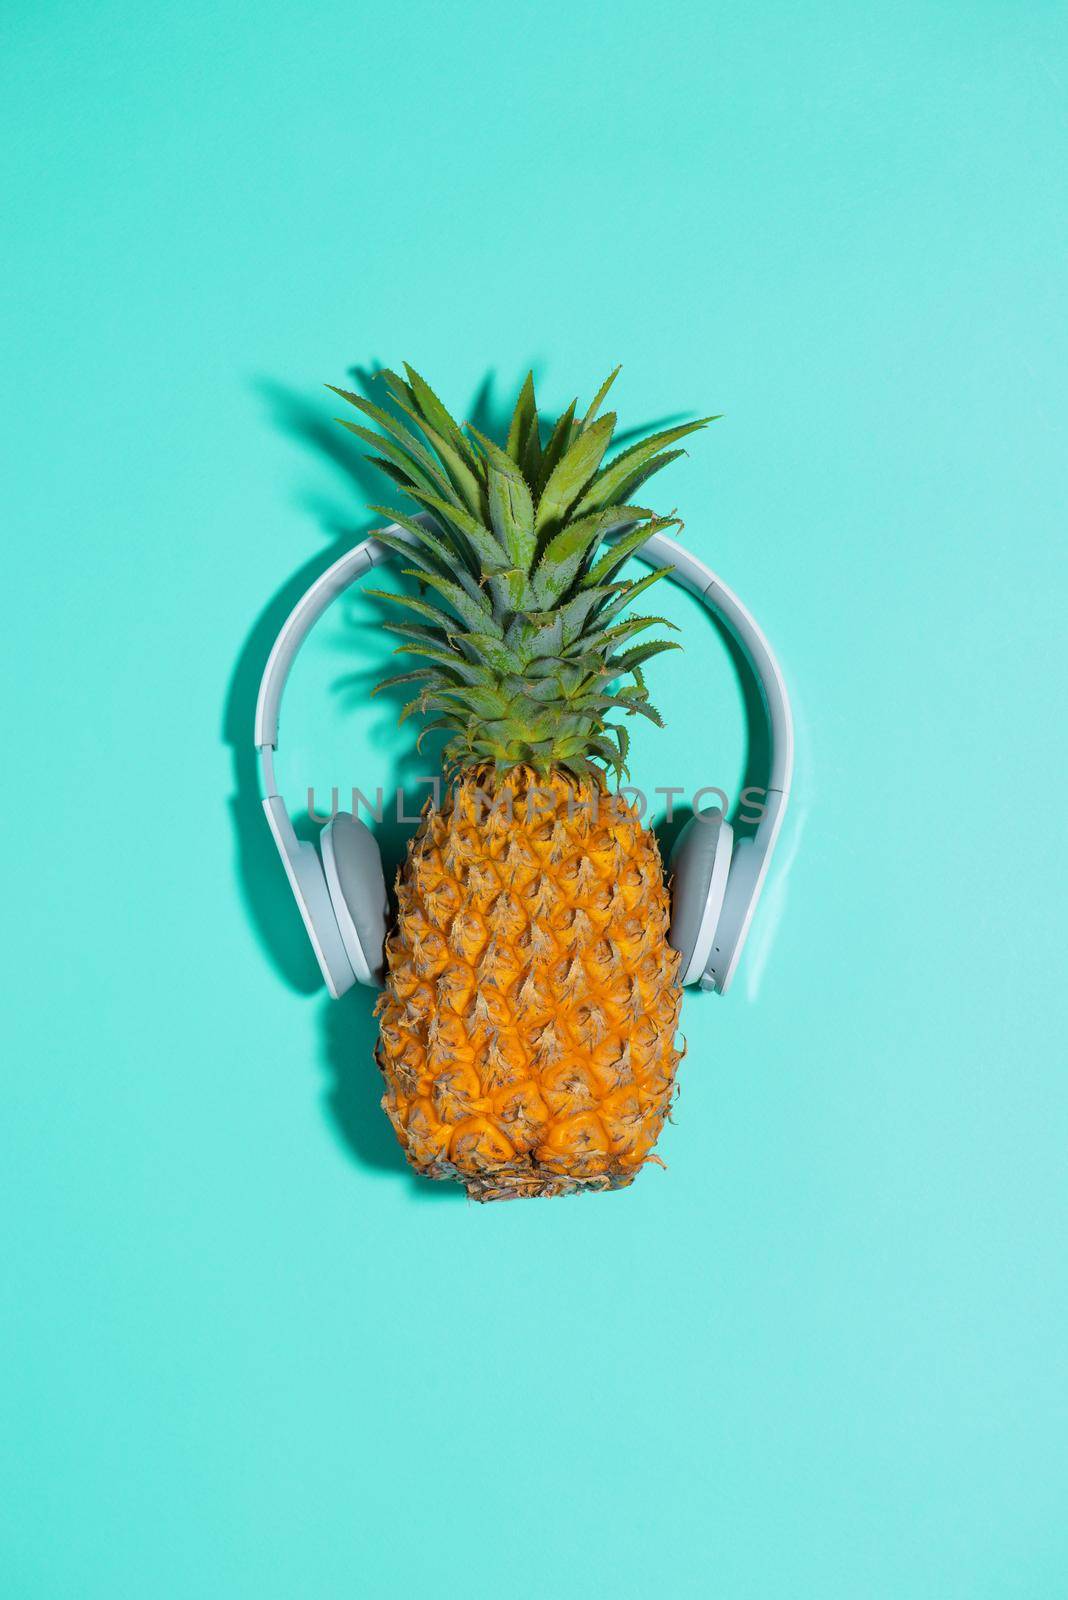 Fashion pineapple with headphones listens to music over blue background